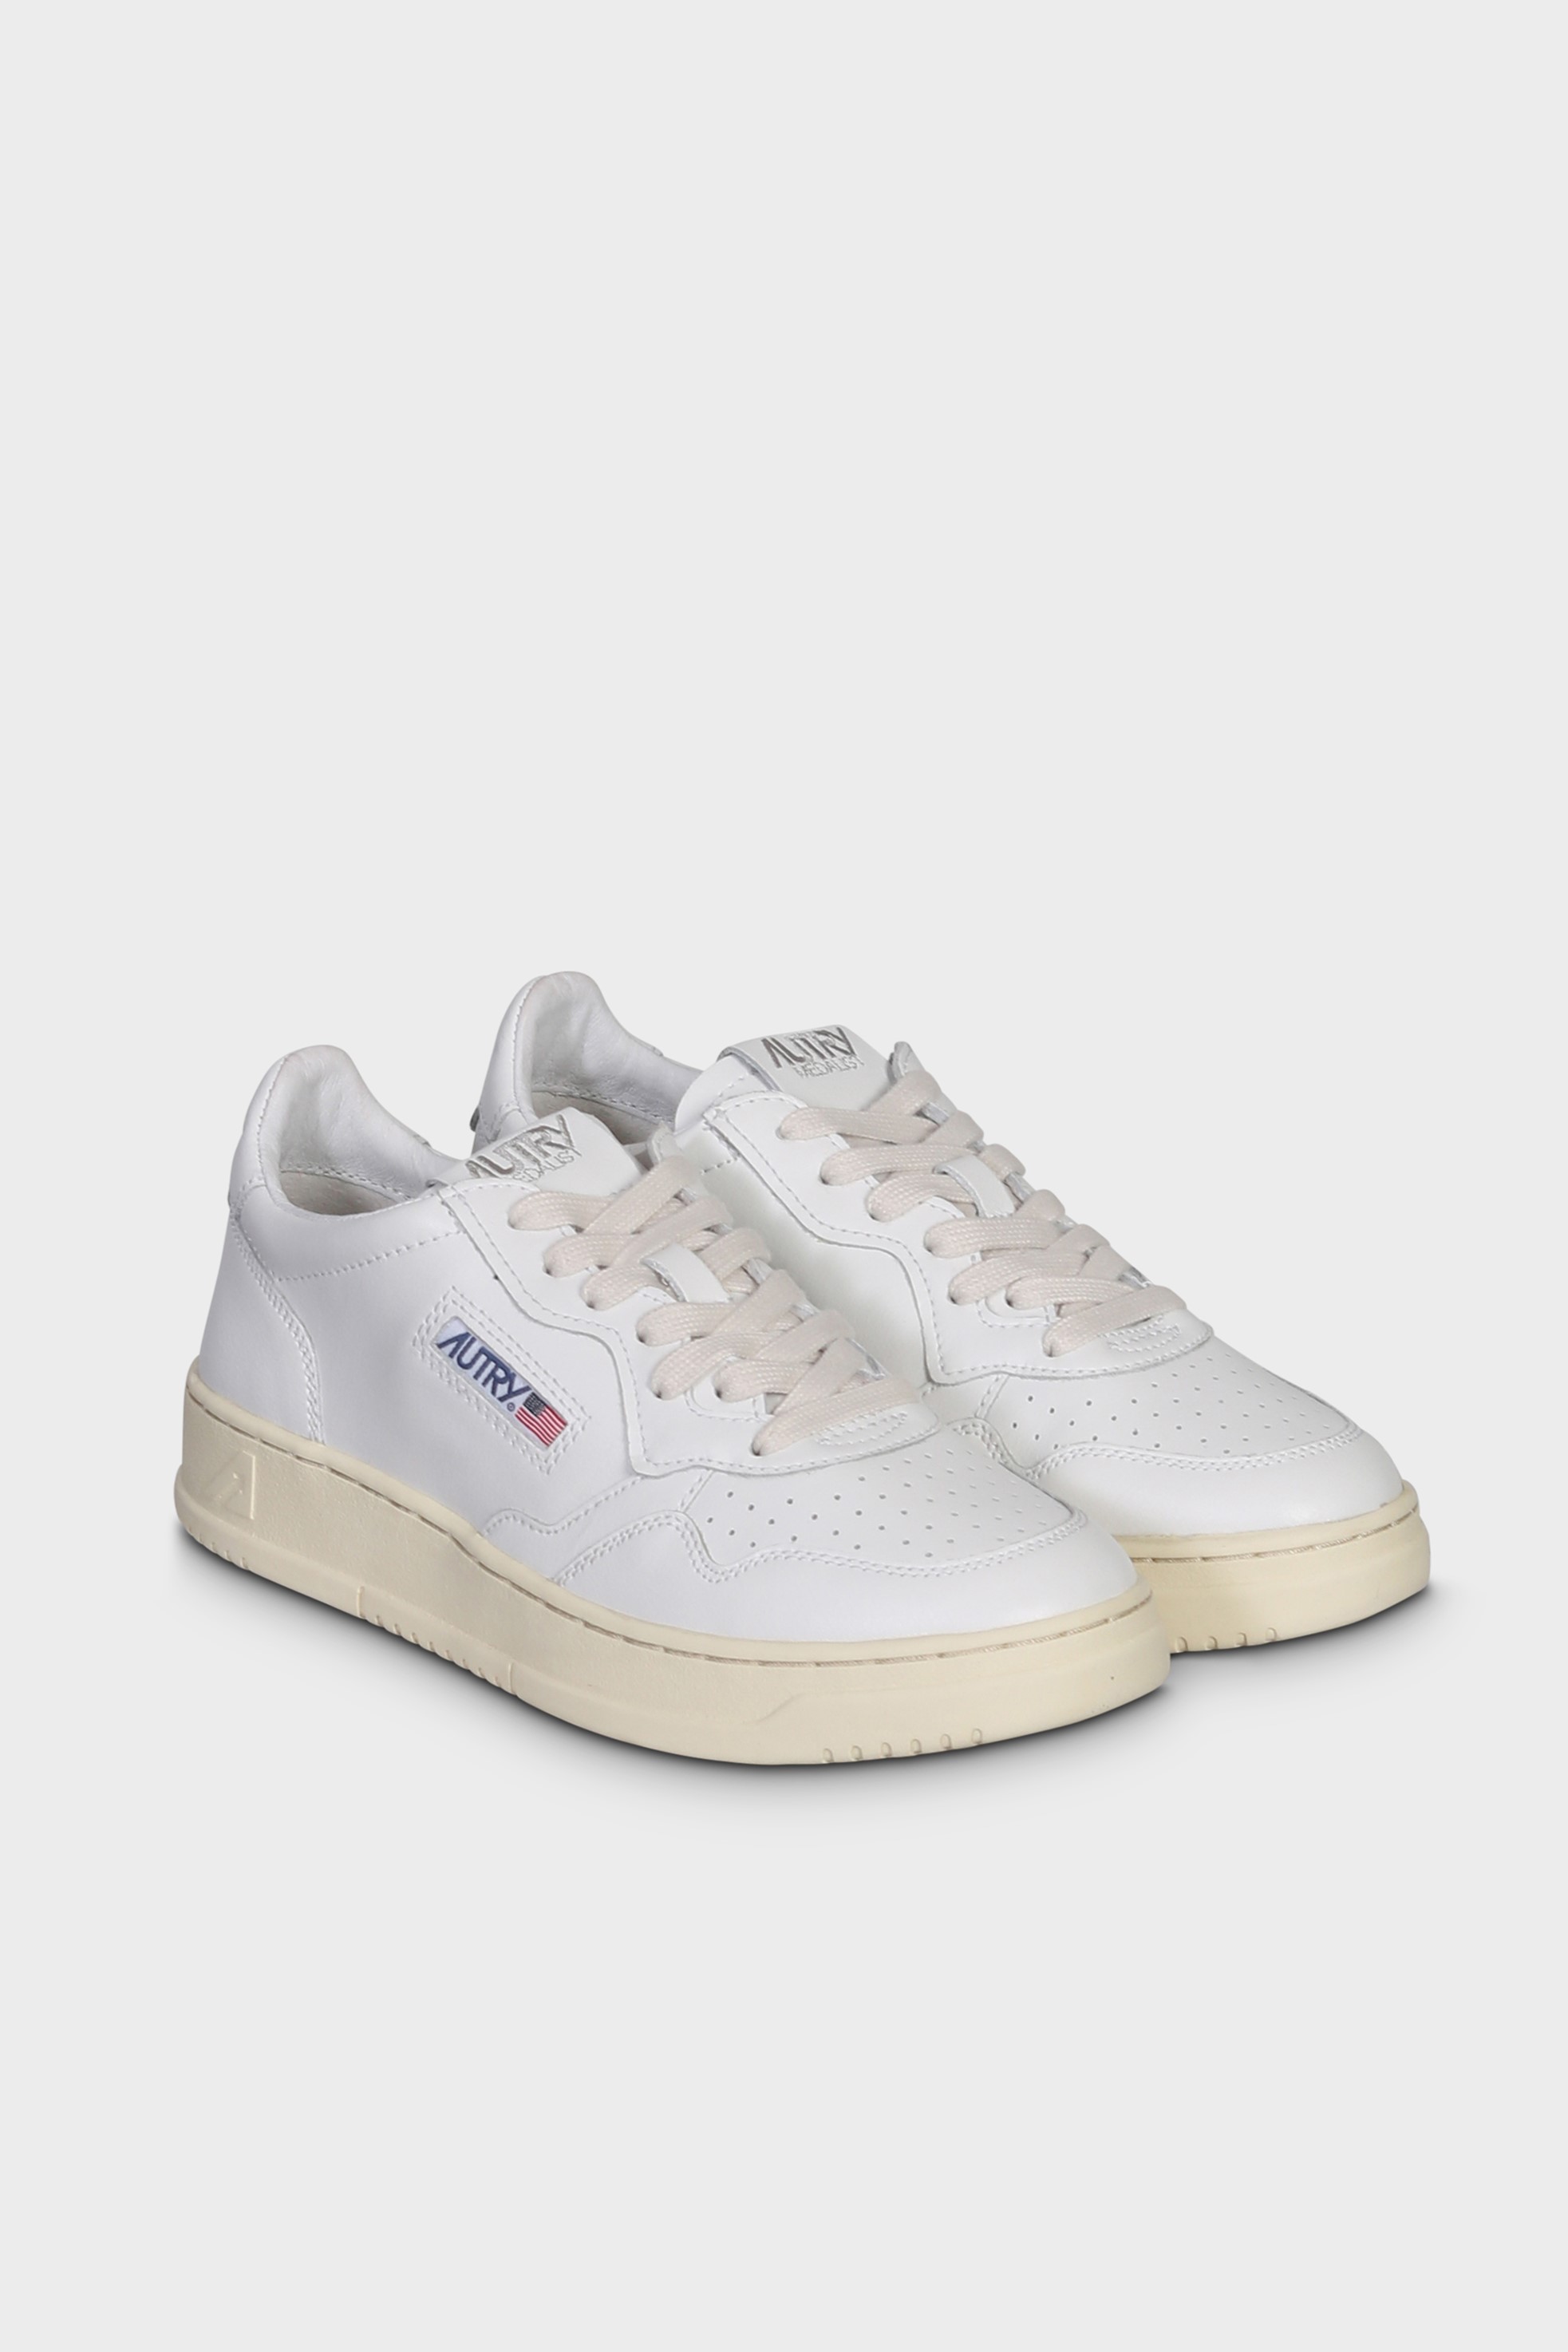 AUTRY ACTION SHOES Medalist Low Sneaker White/White 41